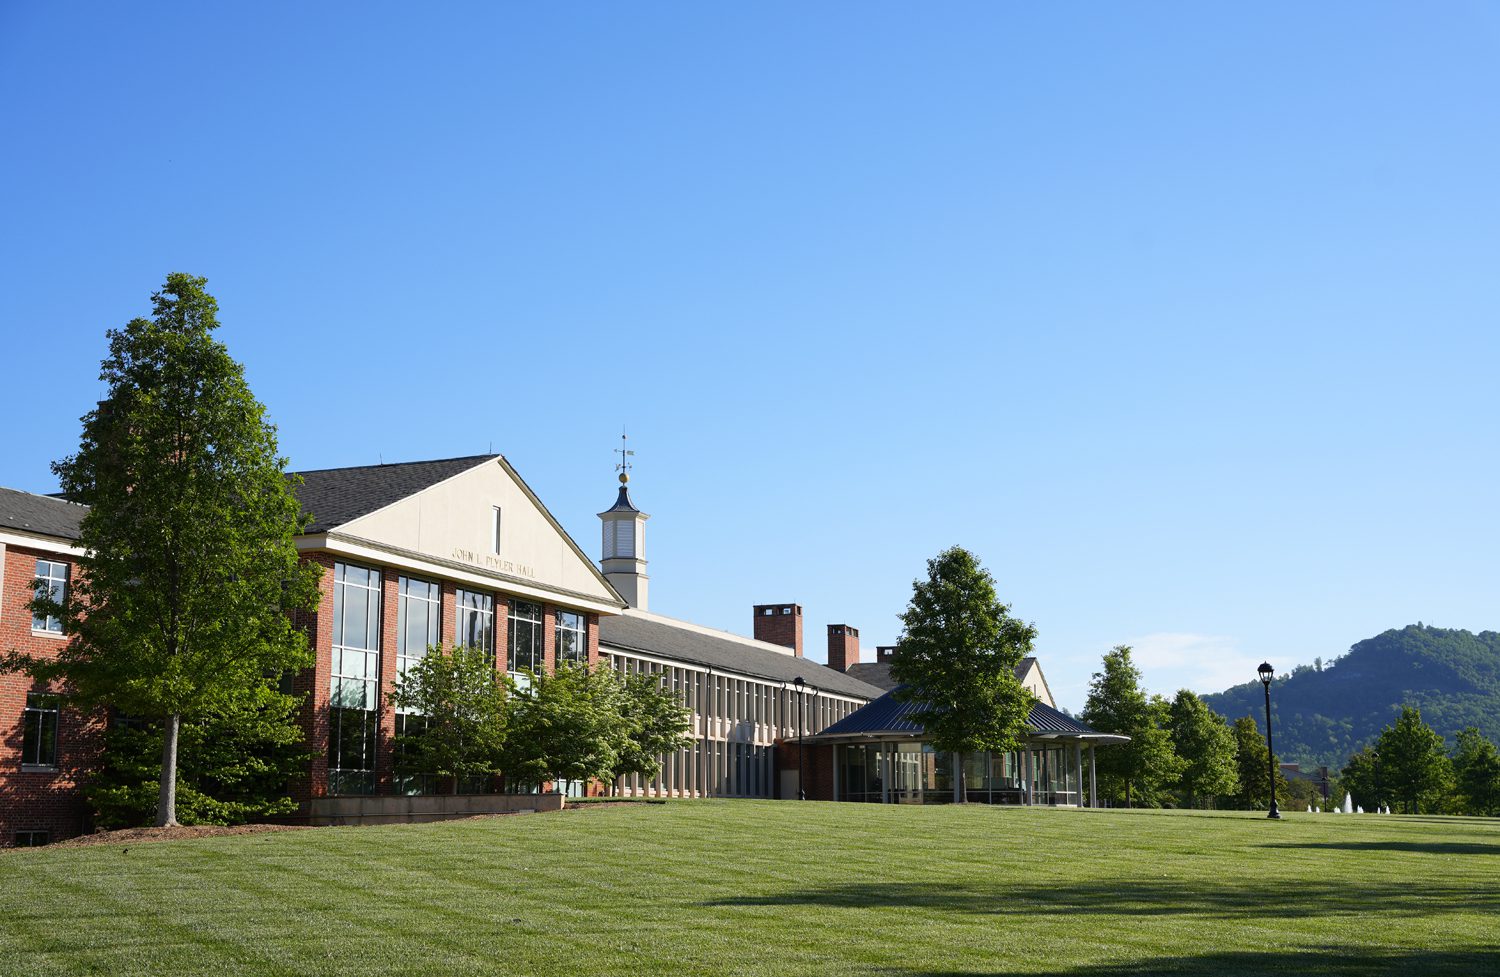 John L. Plyler Hall with Paris Mountain in the background